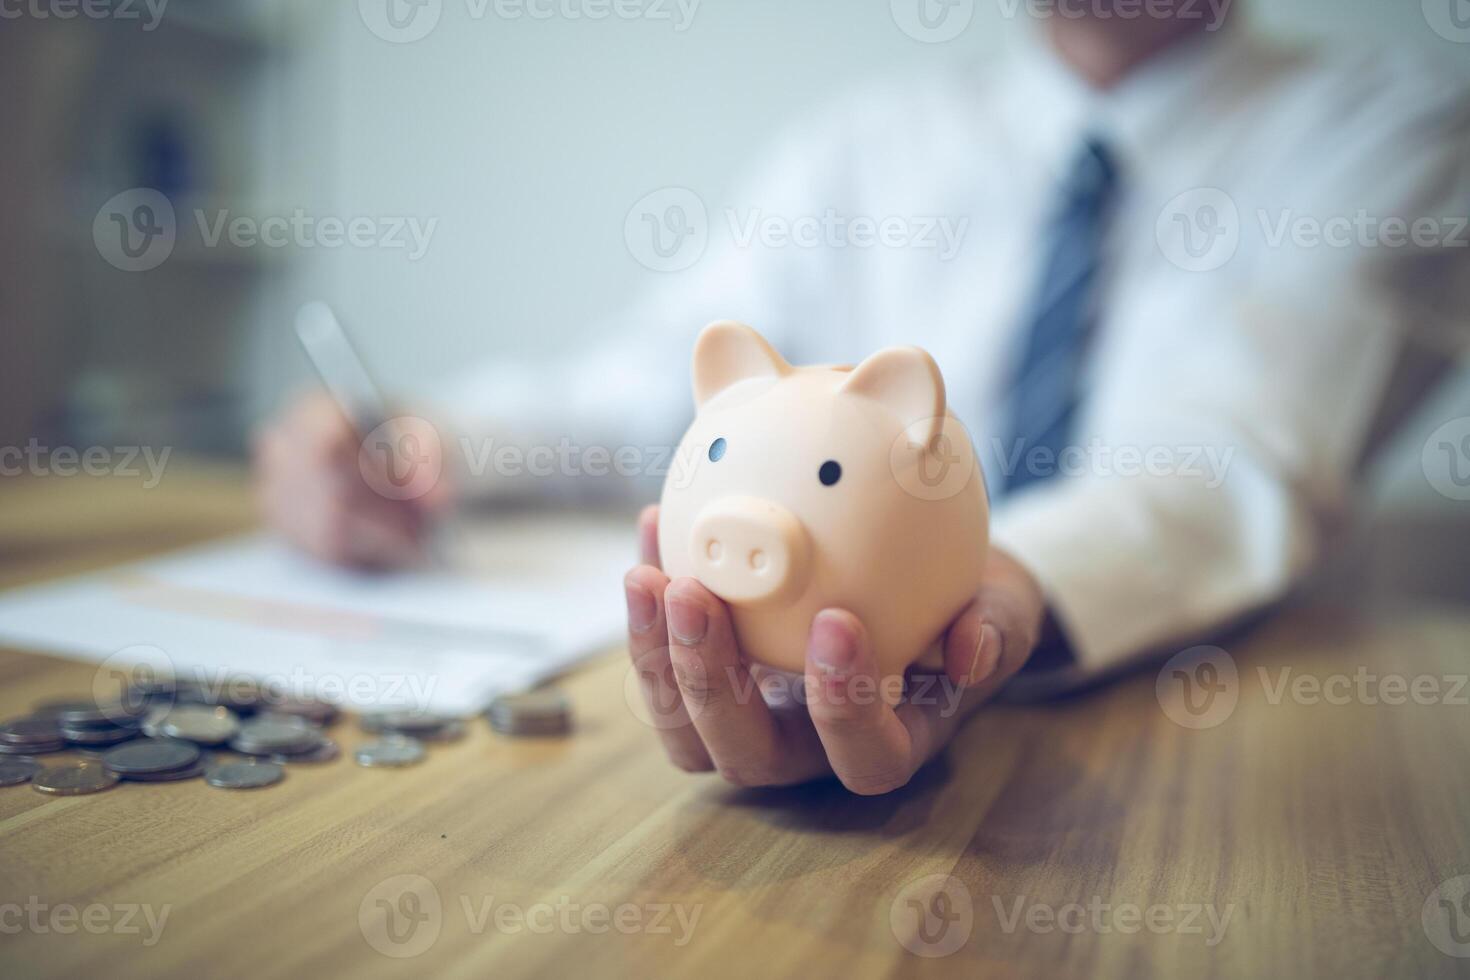 Person in a business shirt saving money in a piggy bank, with coins and financial reports on the table. Saving money business concept photo